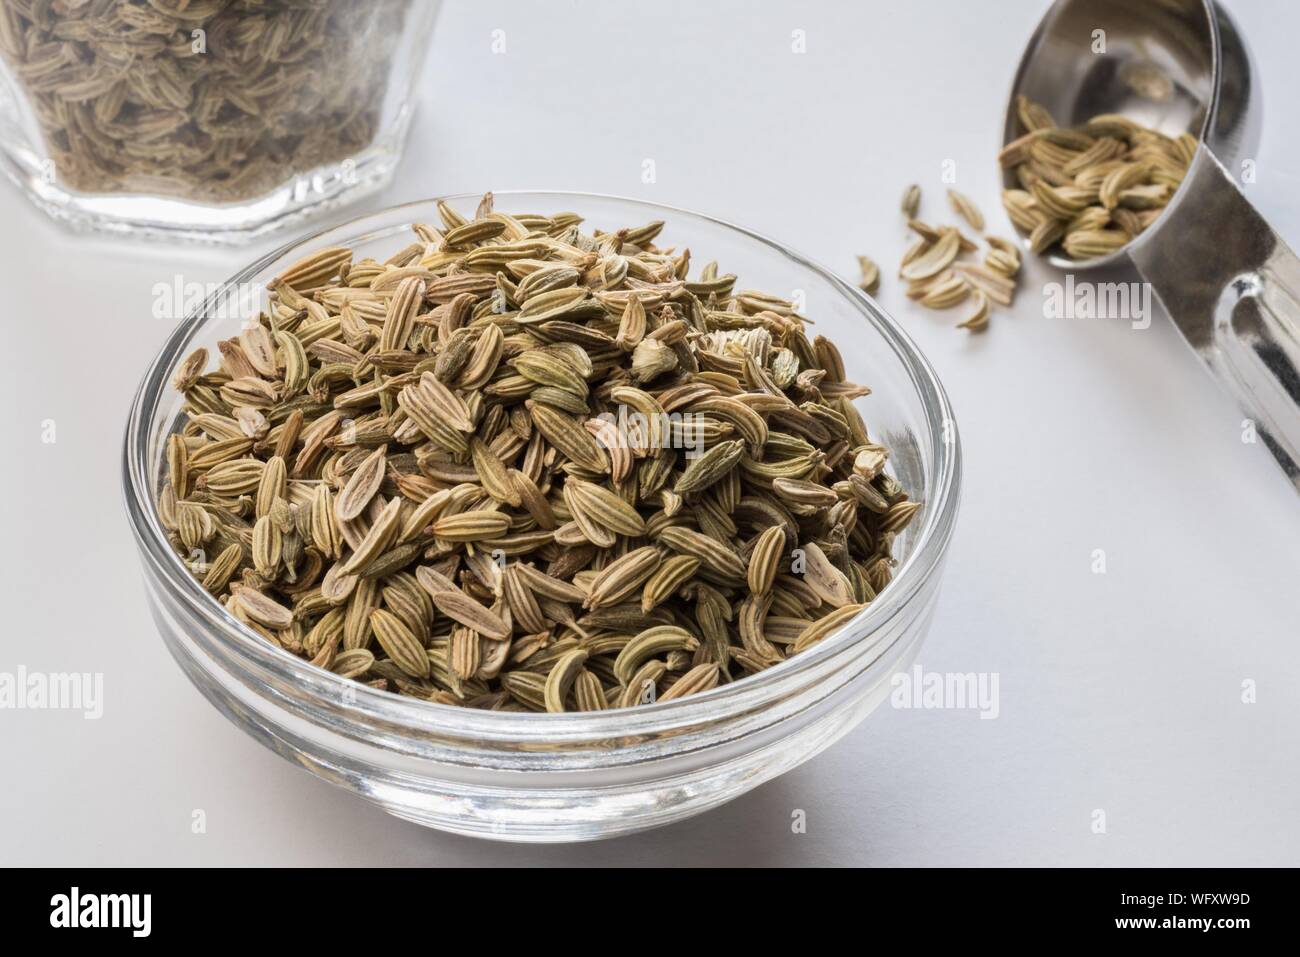 High Angle View Of Fennel Seeds In Bowl On White Table Stock Photo